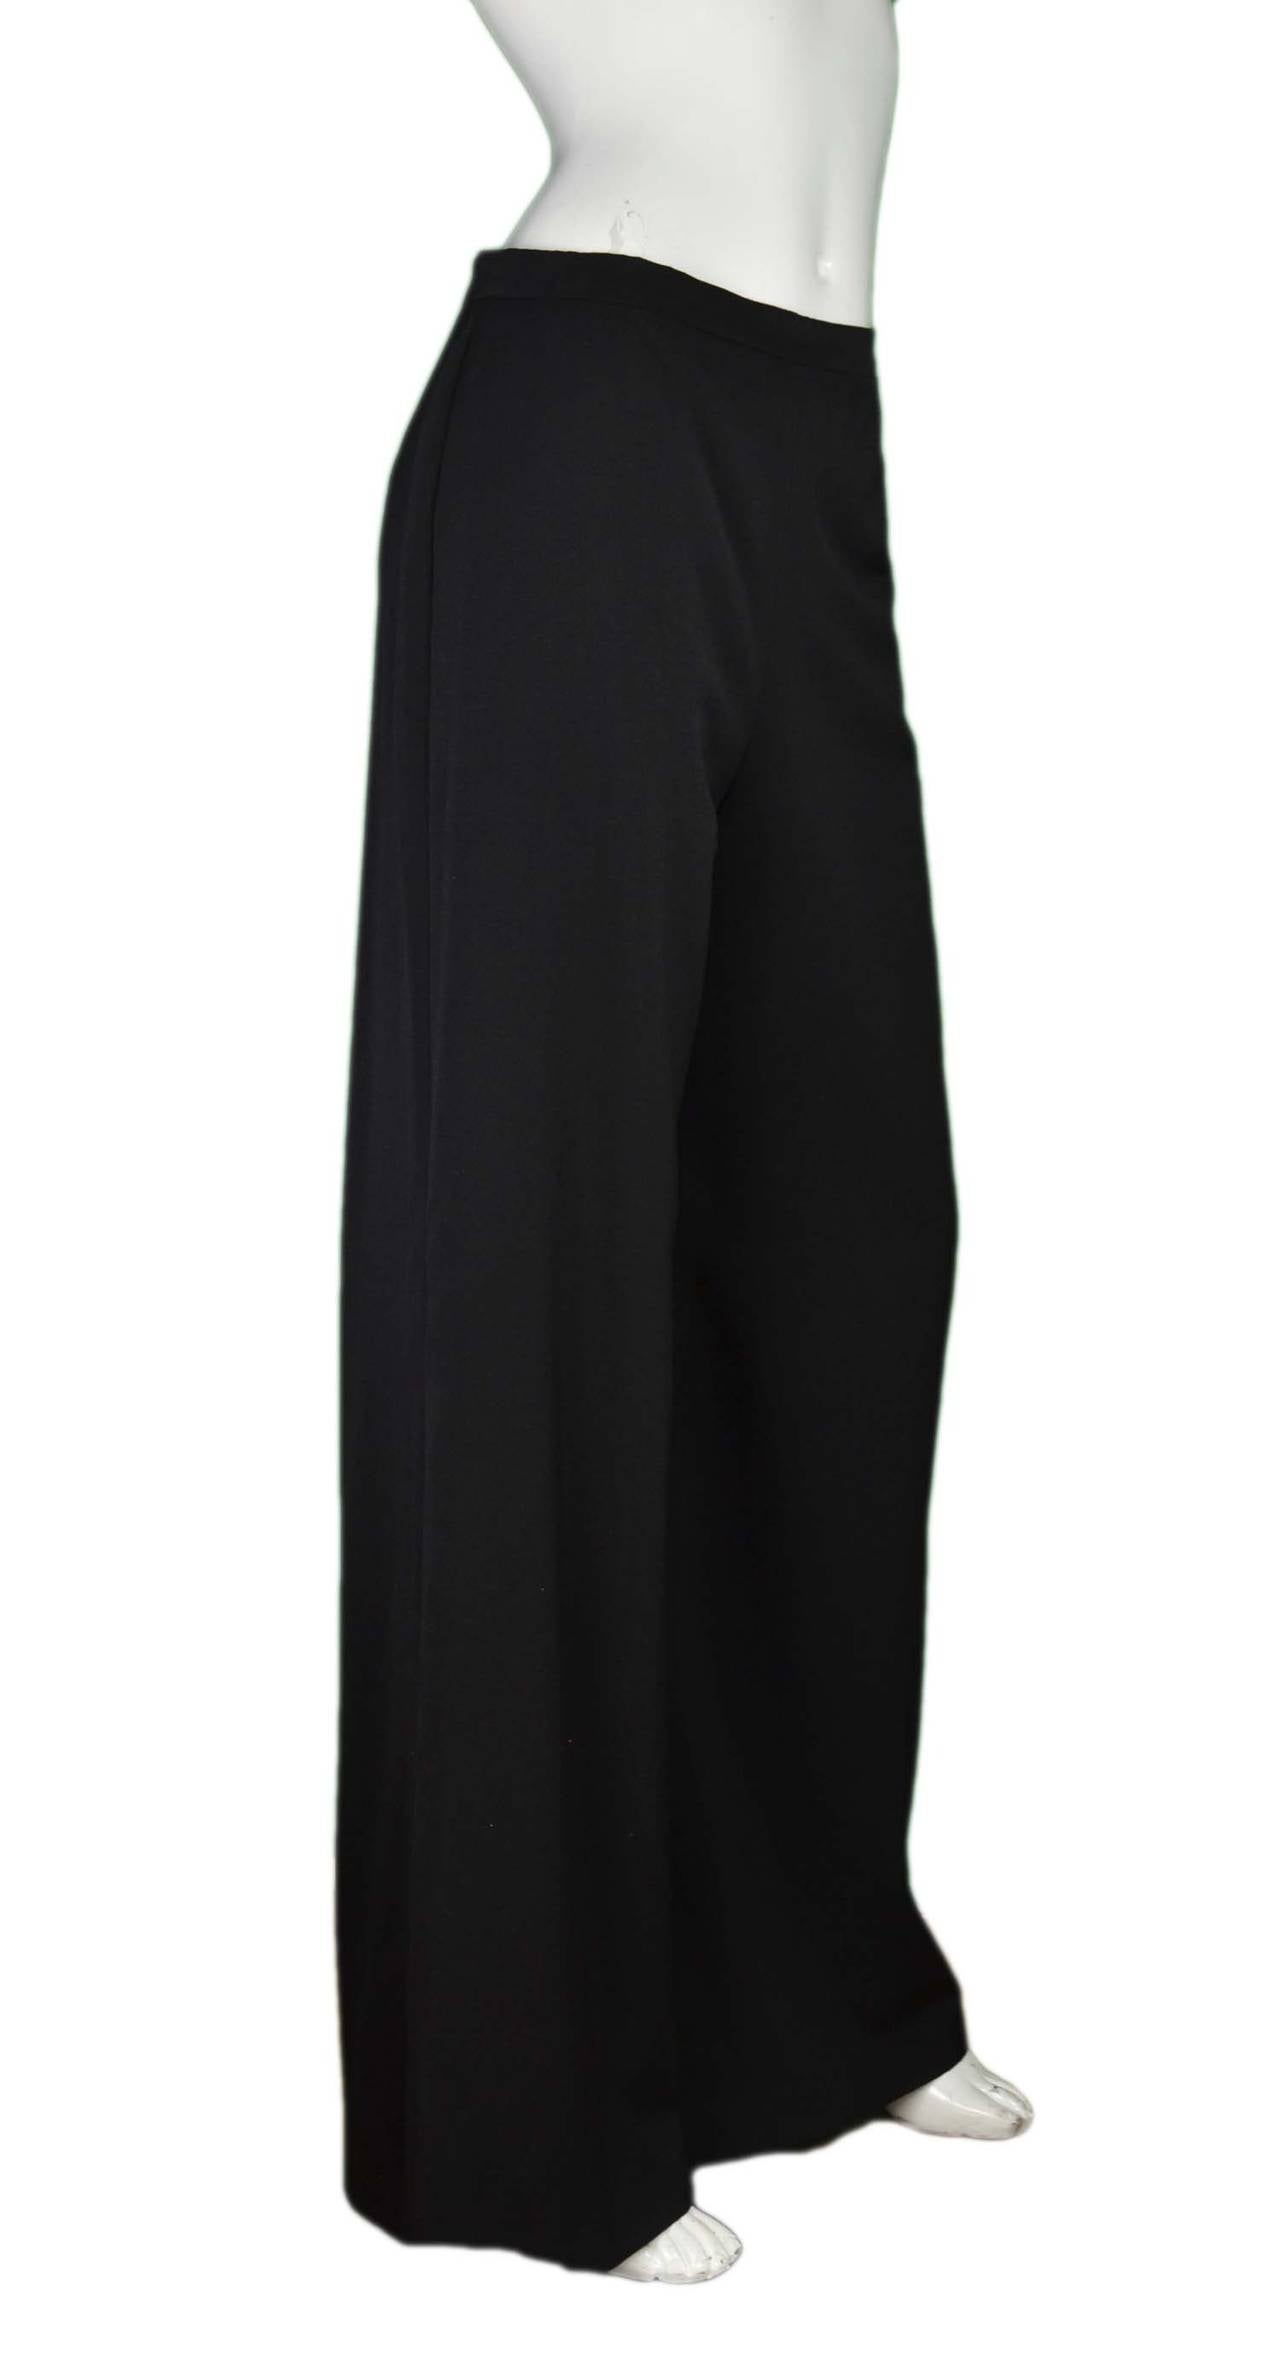 CHANEL Black Wide Leg Pants sz. 40
Made in: France
Year of Production: 2010-2014
Color: Black
Composition: 100% Wool
Lining: 100% Black Silk
Closure/opening: Side zipper with CC button
Exterior Pockets: Two pockets, one at each hip
Retail: